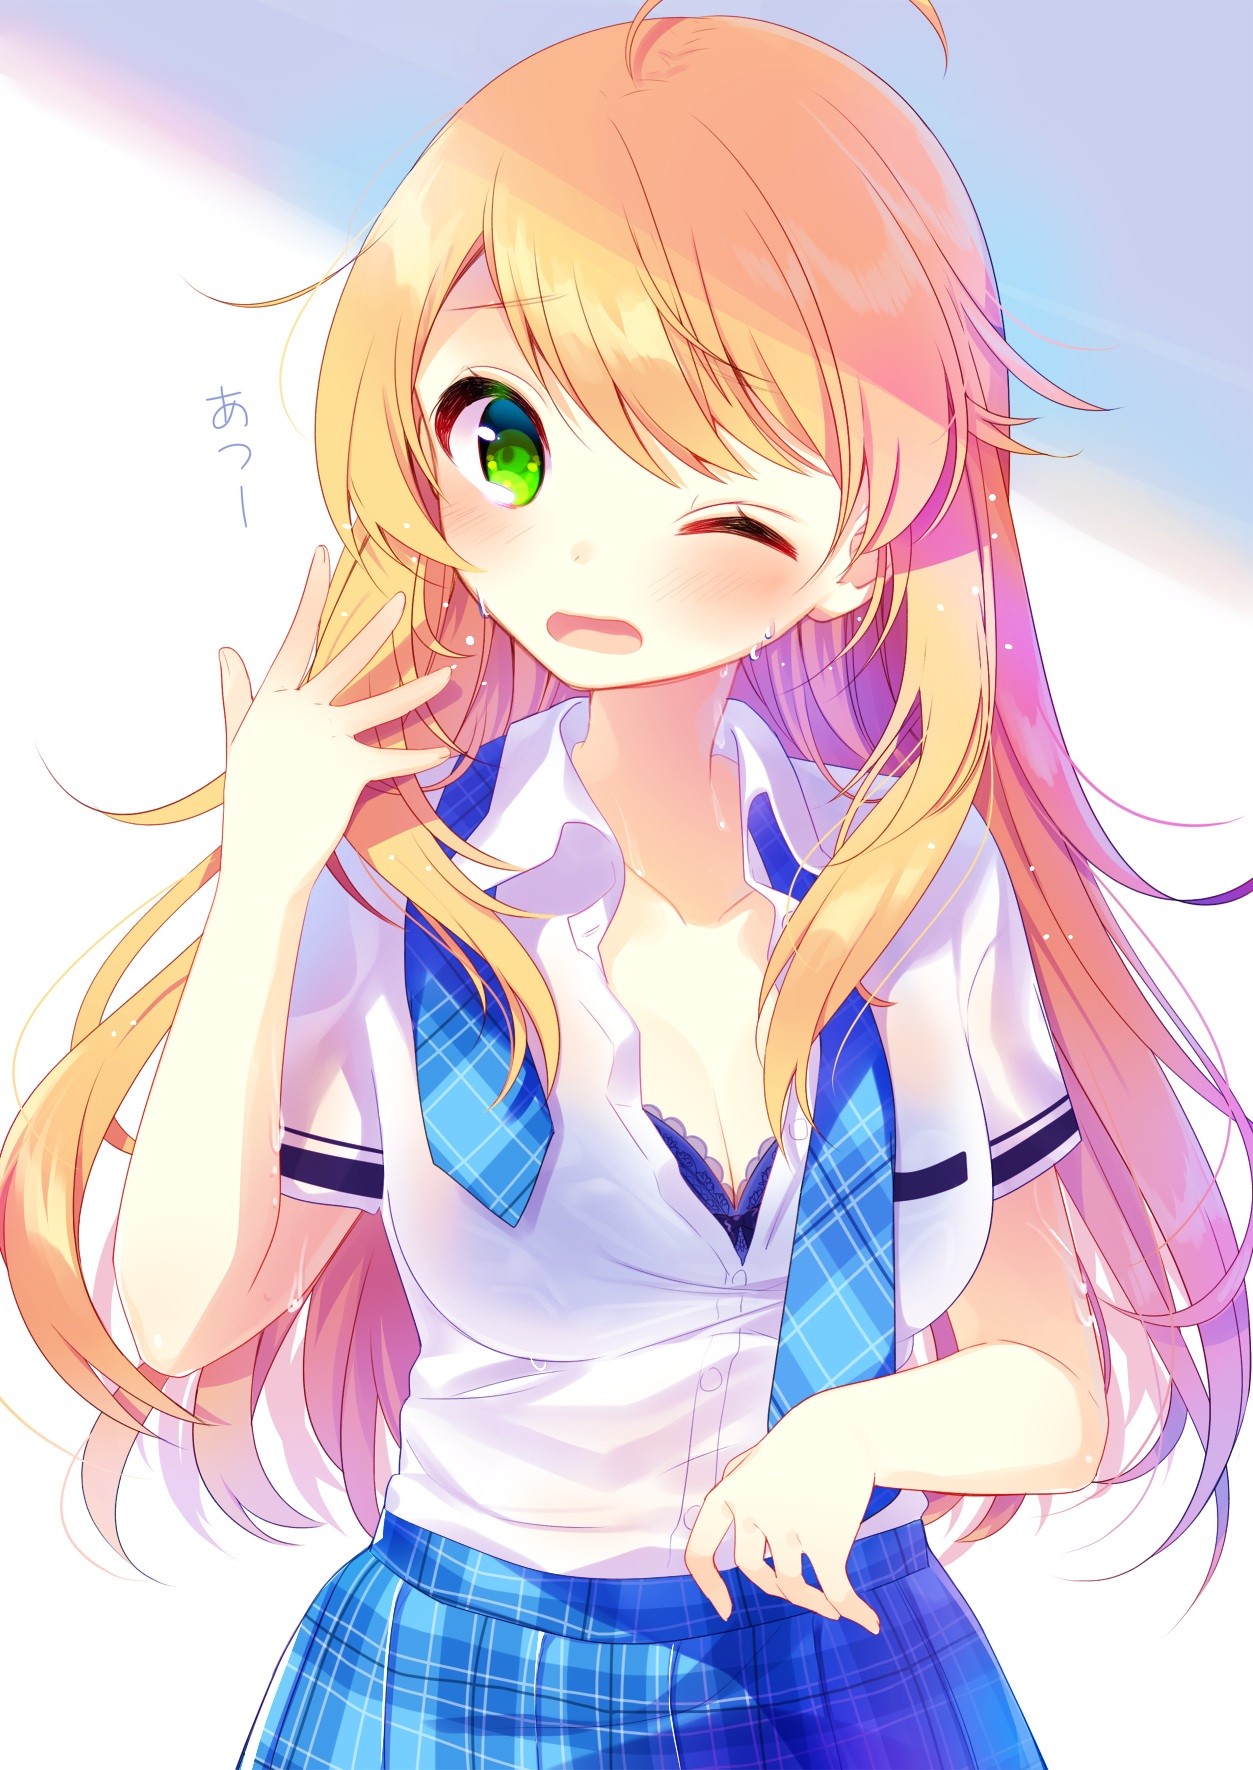 Anime 1253x1770 anime anime girls THE iDOLM@STER Hoshii Miki bra cleavage long hair blonde green eyes Pixiv one eye closed tie skirt embarrassed